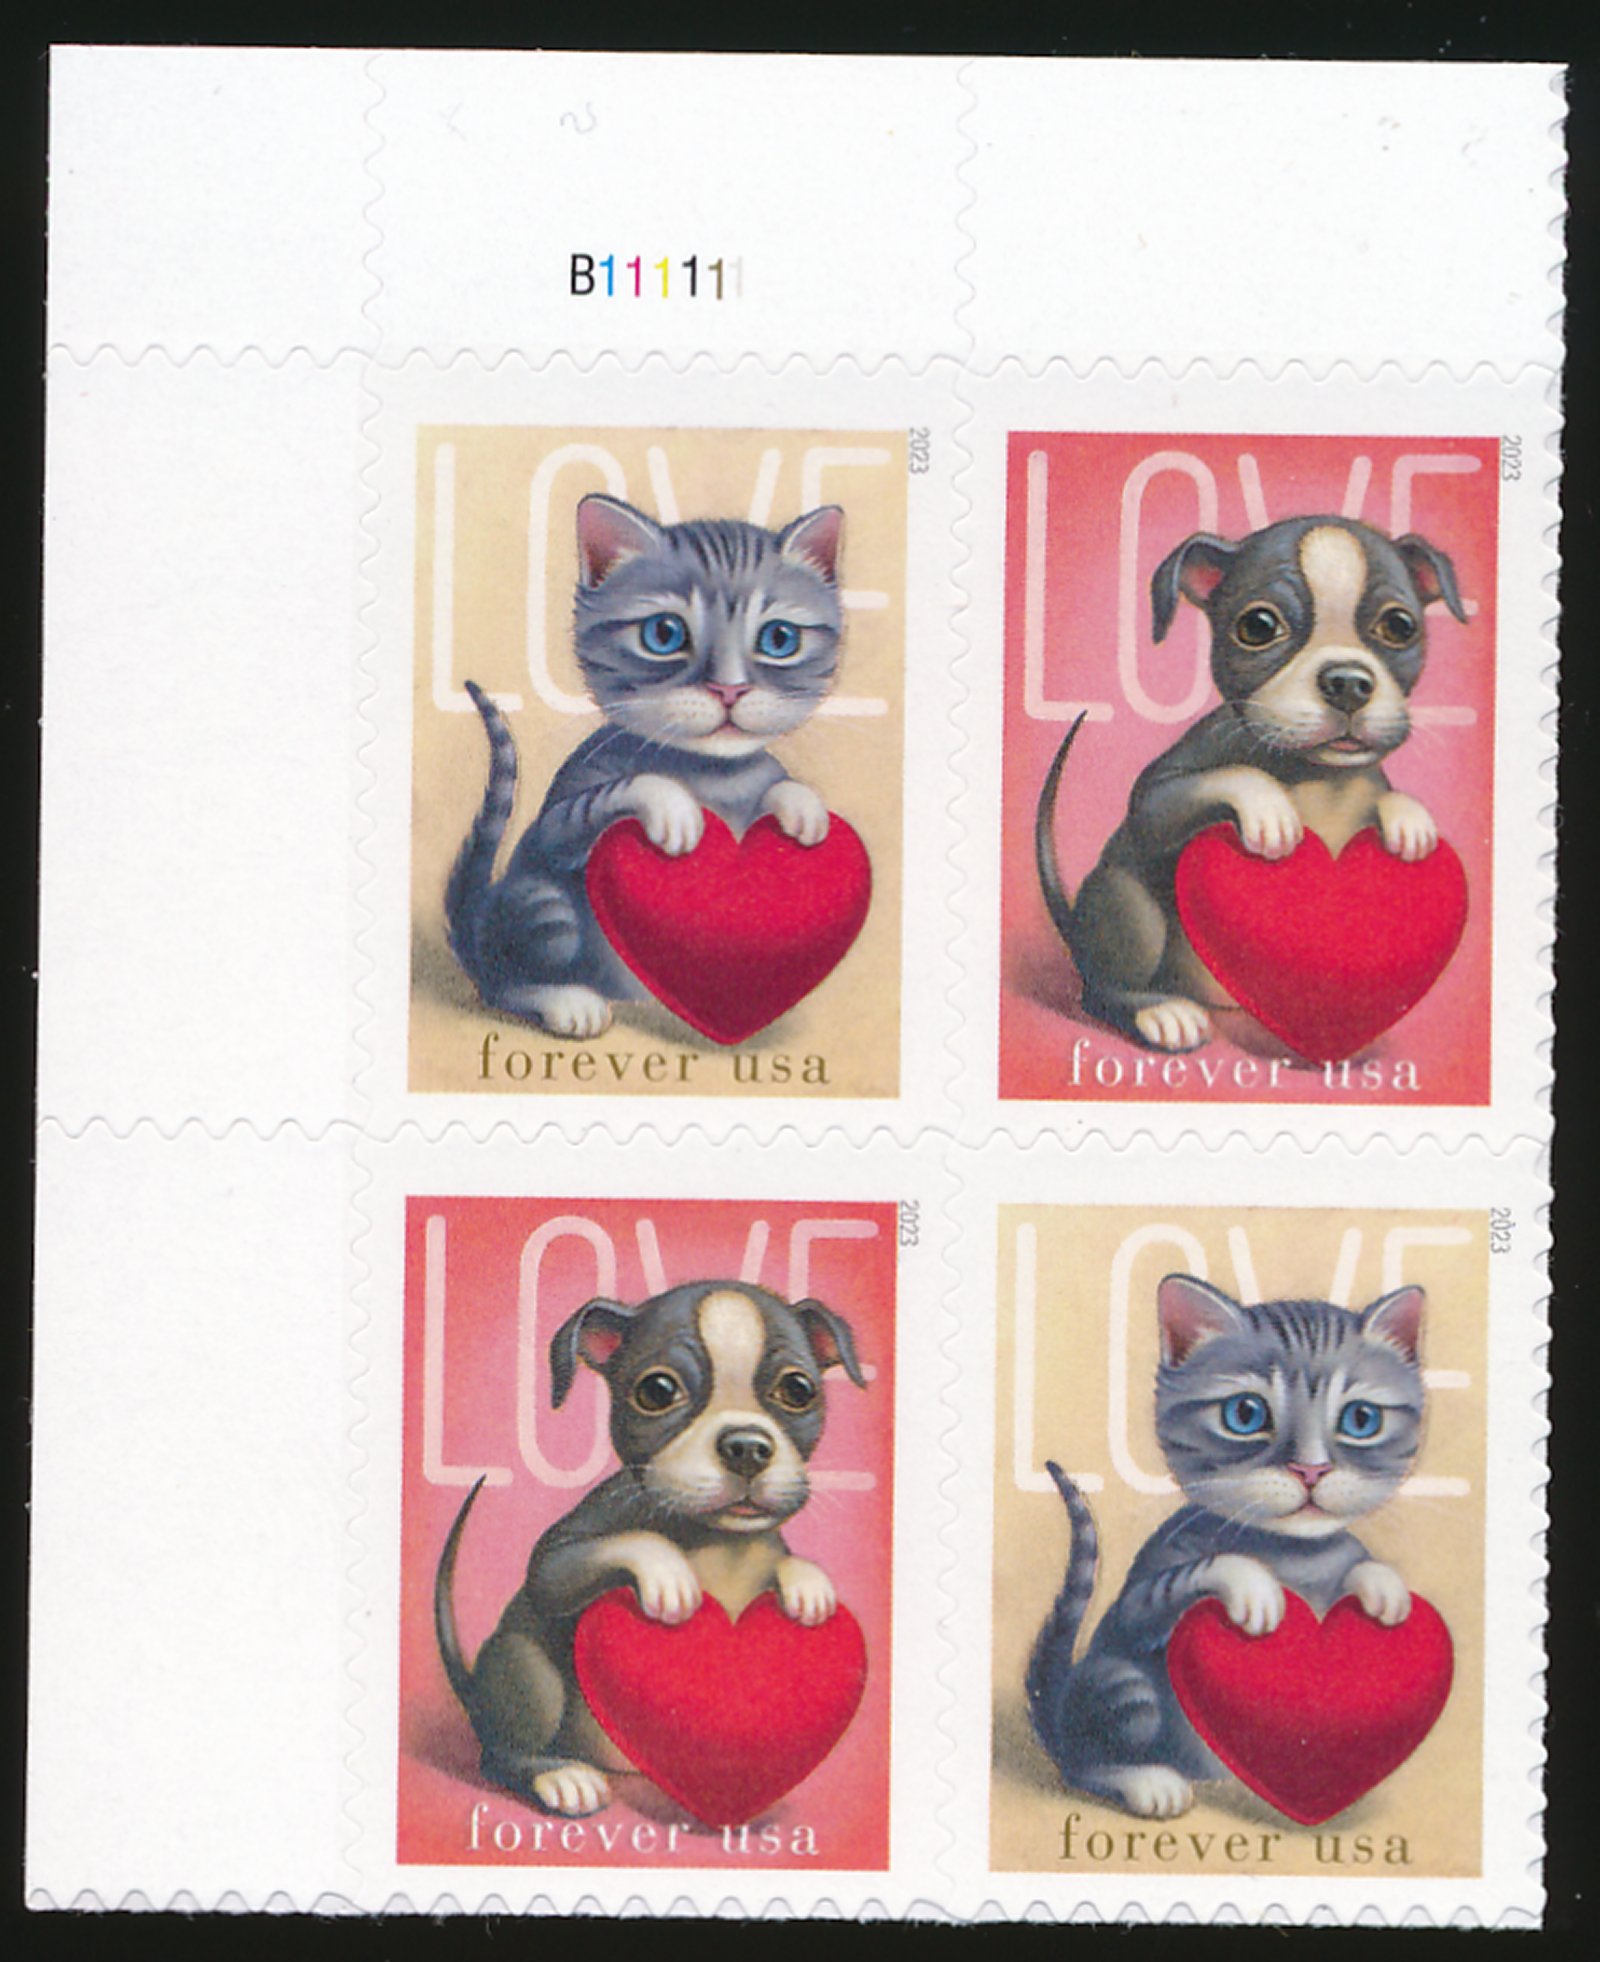 5745-46 .60 Love Cats and Dogs  Plate Block of 4 5745-46pb